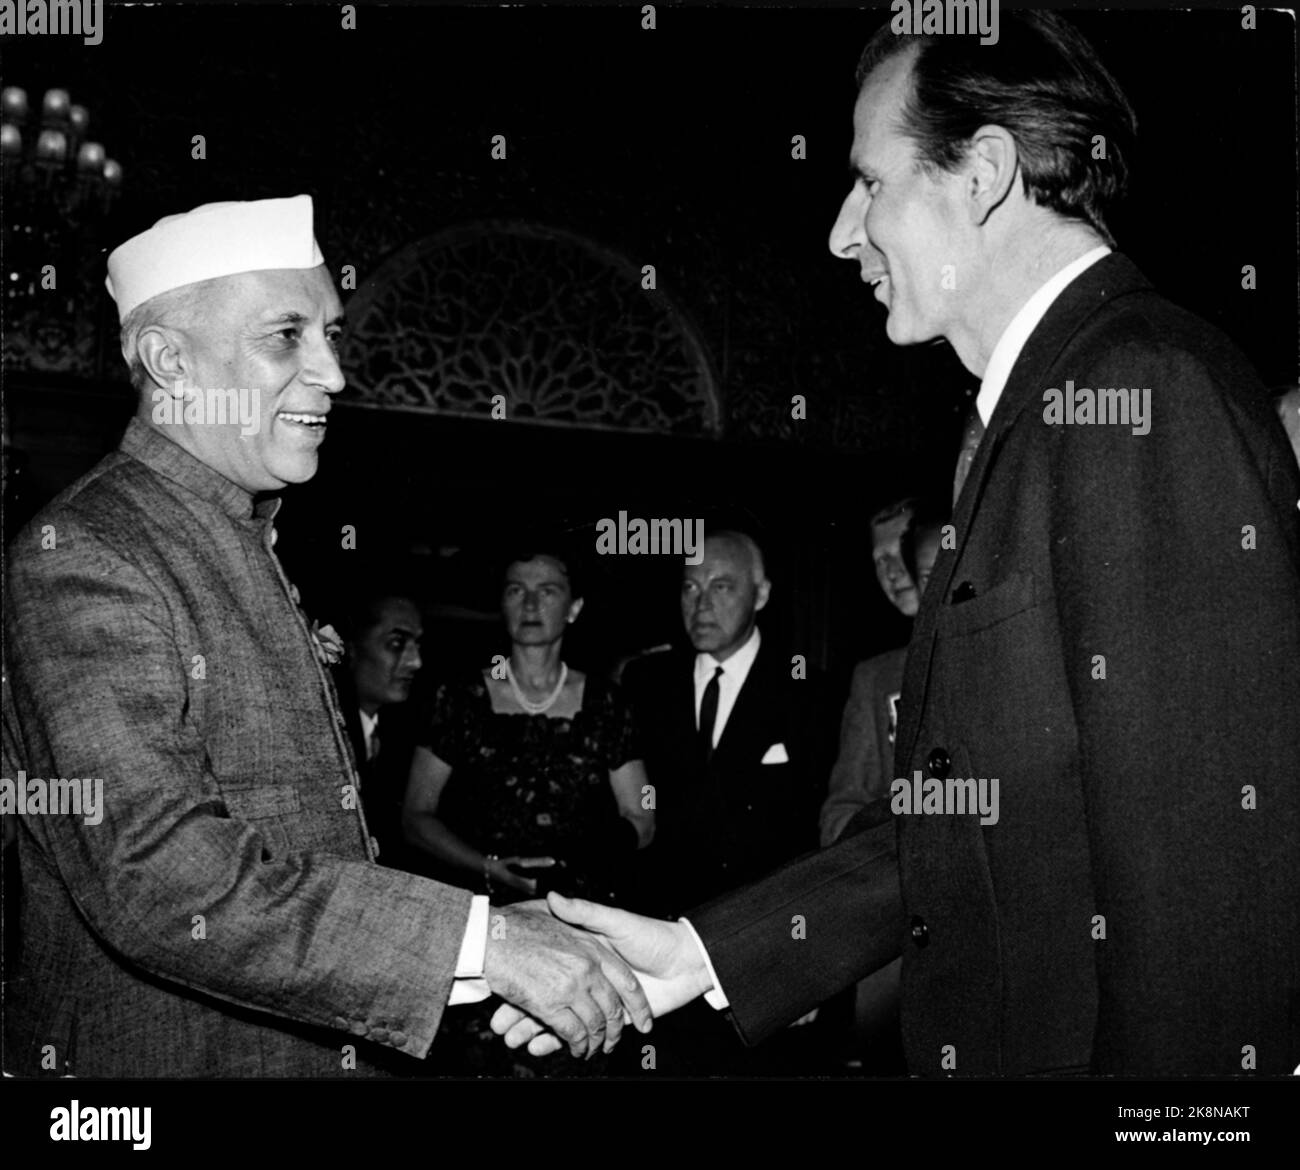 Professor and rock climber Arne Næs greets India's Prime Minister Jawaharlal Nehru. Probably in connection with the climbing expedition in the Himalayas (Tirich Mir in Hindukush) in 1950. Ntb archive photo Stock Photo